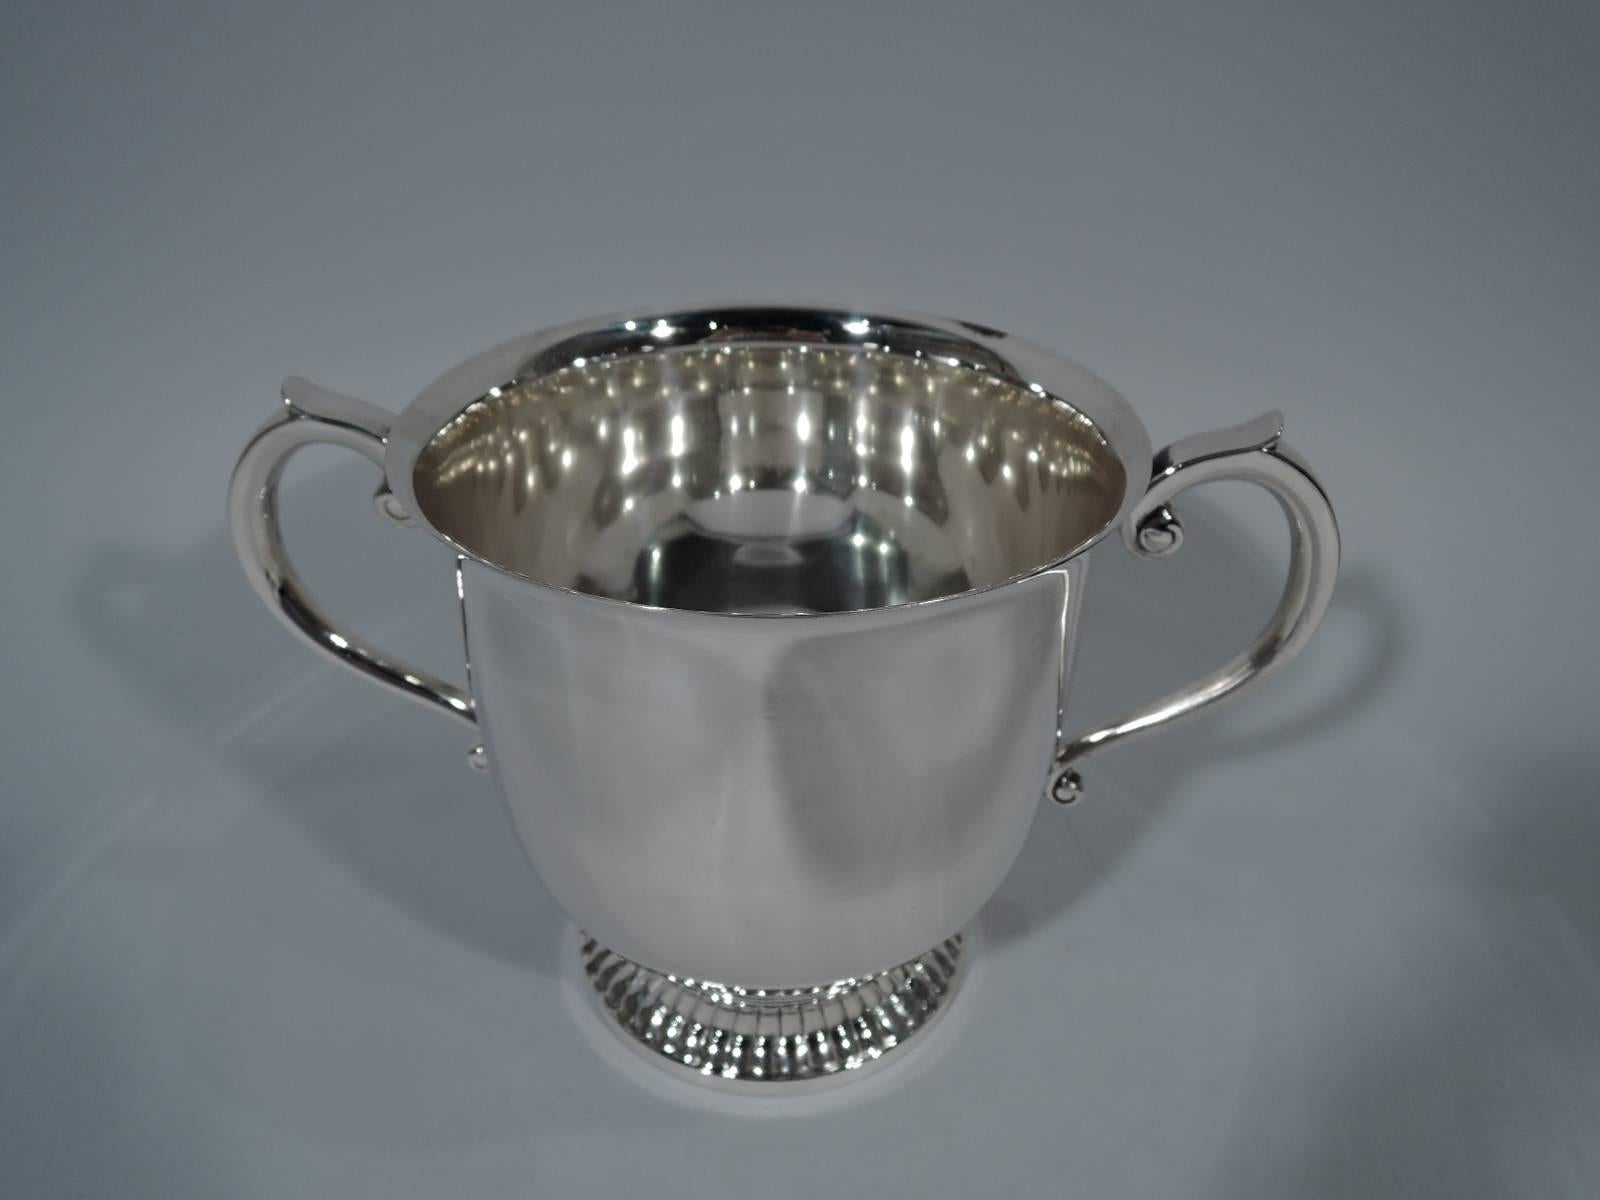 Classic sterling silver trophy cup. Made by Tiffany & Co. in New York, circa 1965. Urn with flared rim, capped scroll side handles, and raised and gadrooned foot. Good heft and lots of room for engraving. Hallmarked. Heavy weight: 34.2 troy ounces.